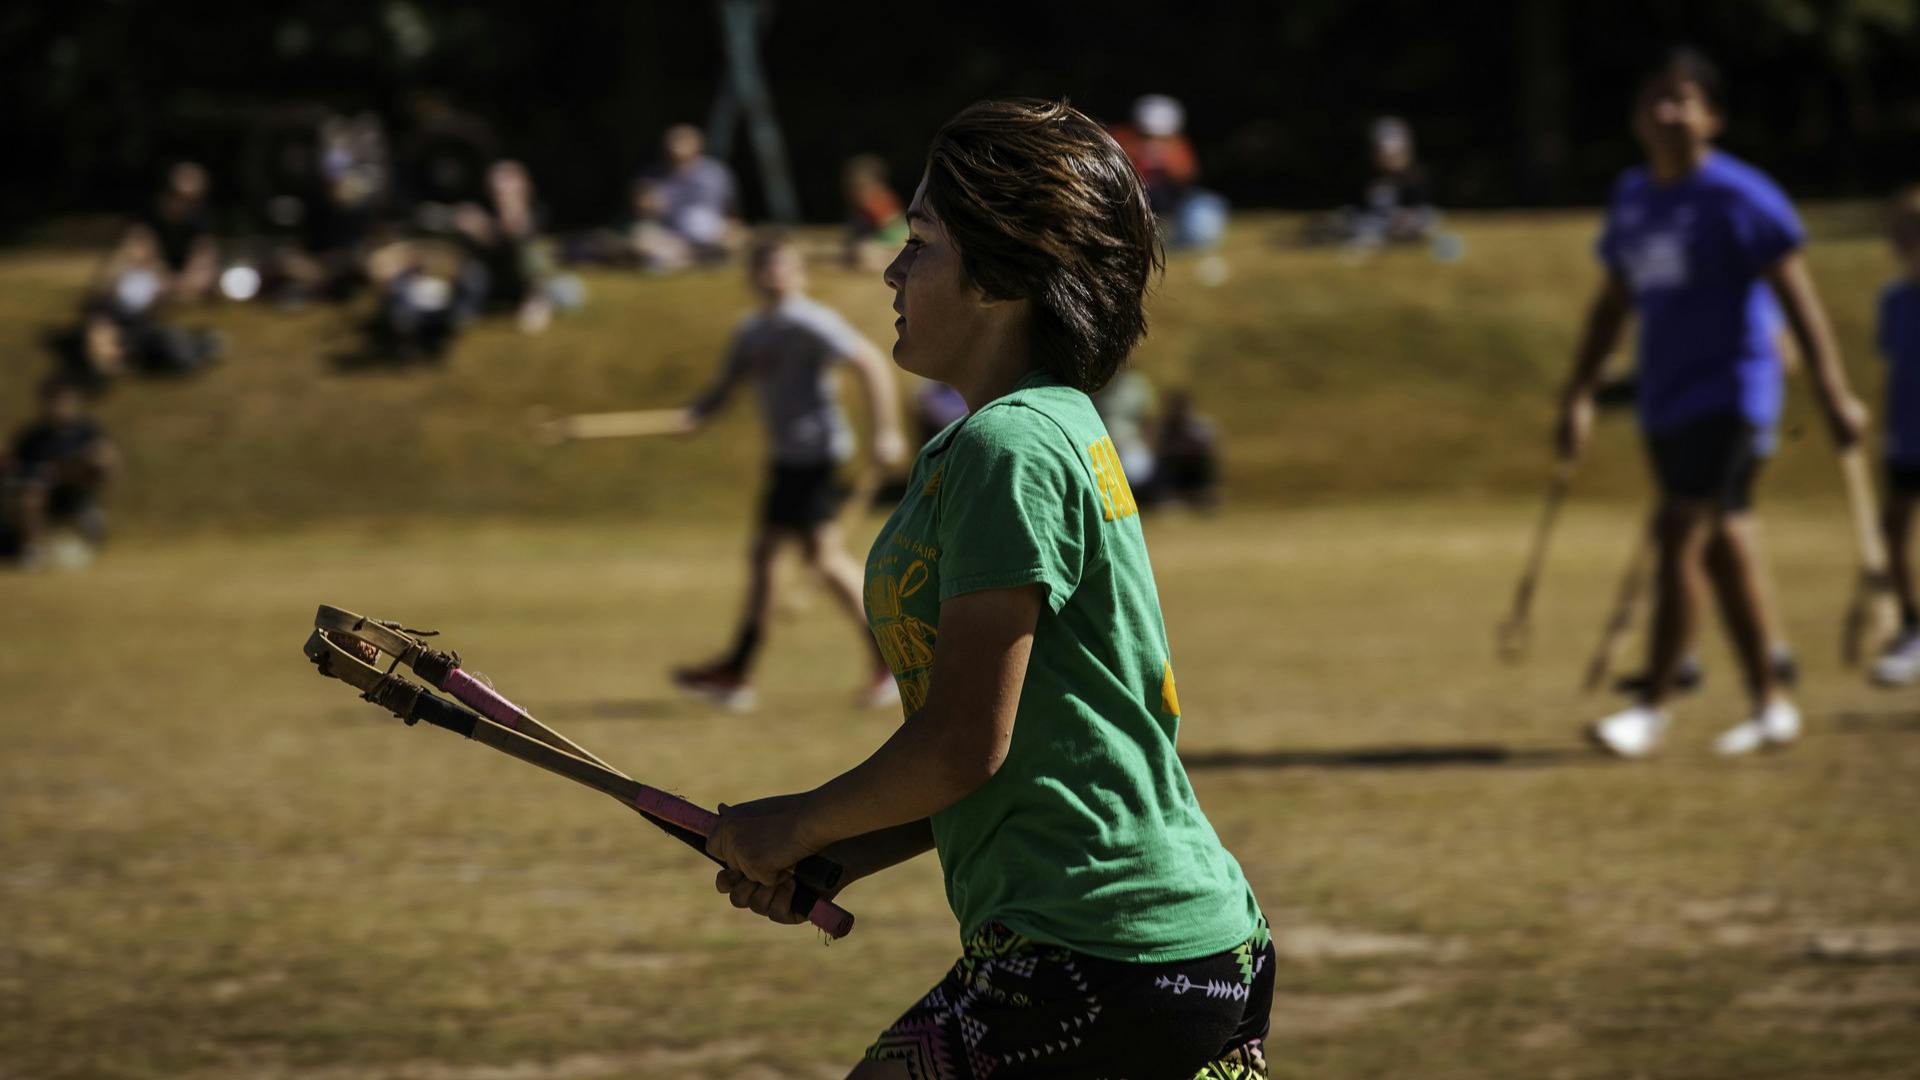 A Stickball player holds their sticks in front of them, while others run on the field in the background.